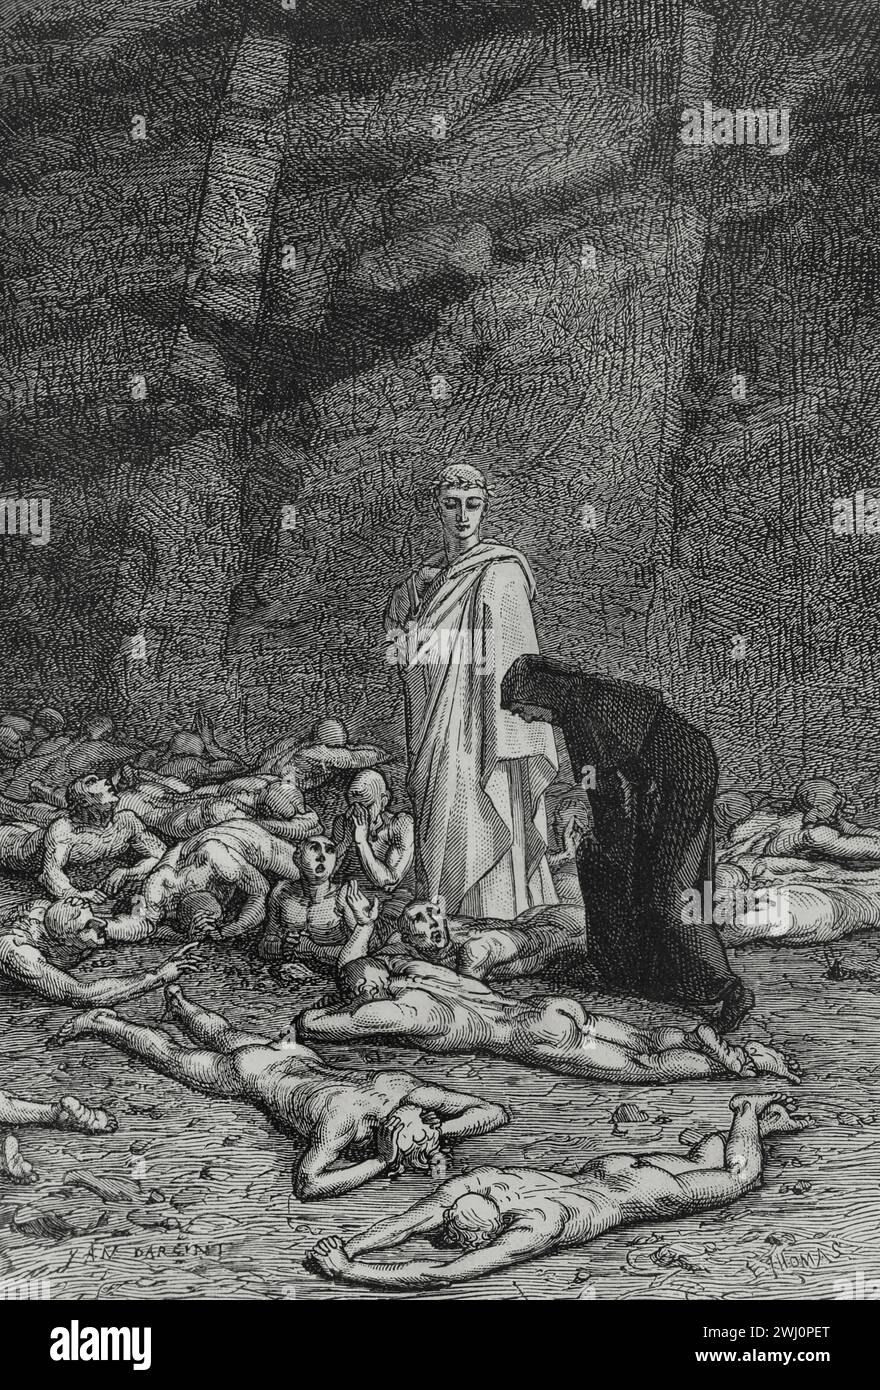 The Divine Comedy (1307-1321). Italian narrative poem by the Italian poet Dante Alighieri (1265-1321). Purgatory. 'What is it about you that you only look down at the ground?...' Illustration by Yann Dargent (1824-1899). Engraving. Published in Paris, 1888. Stock Photo